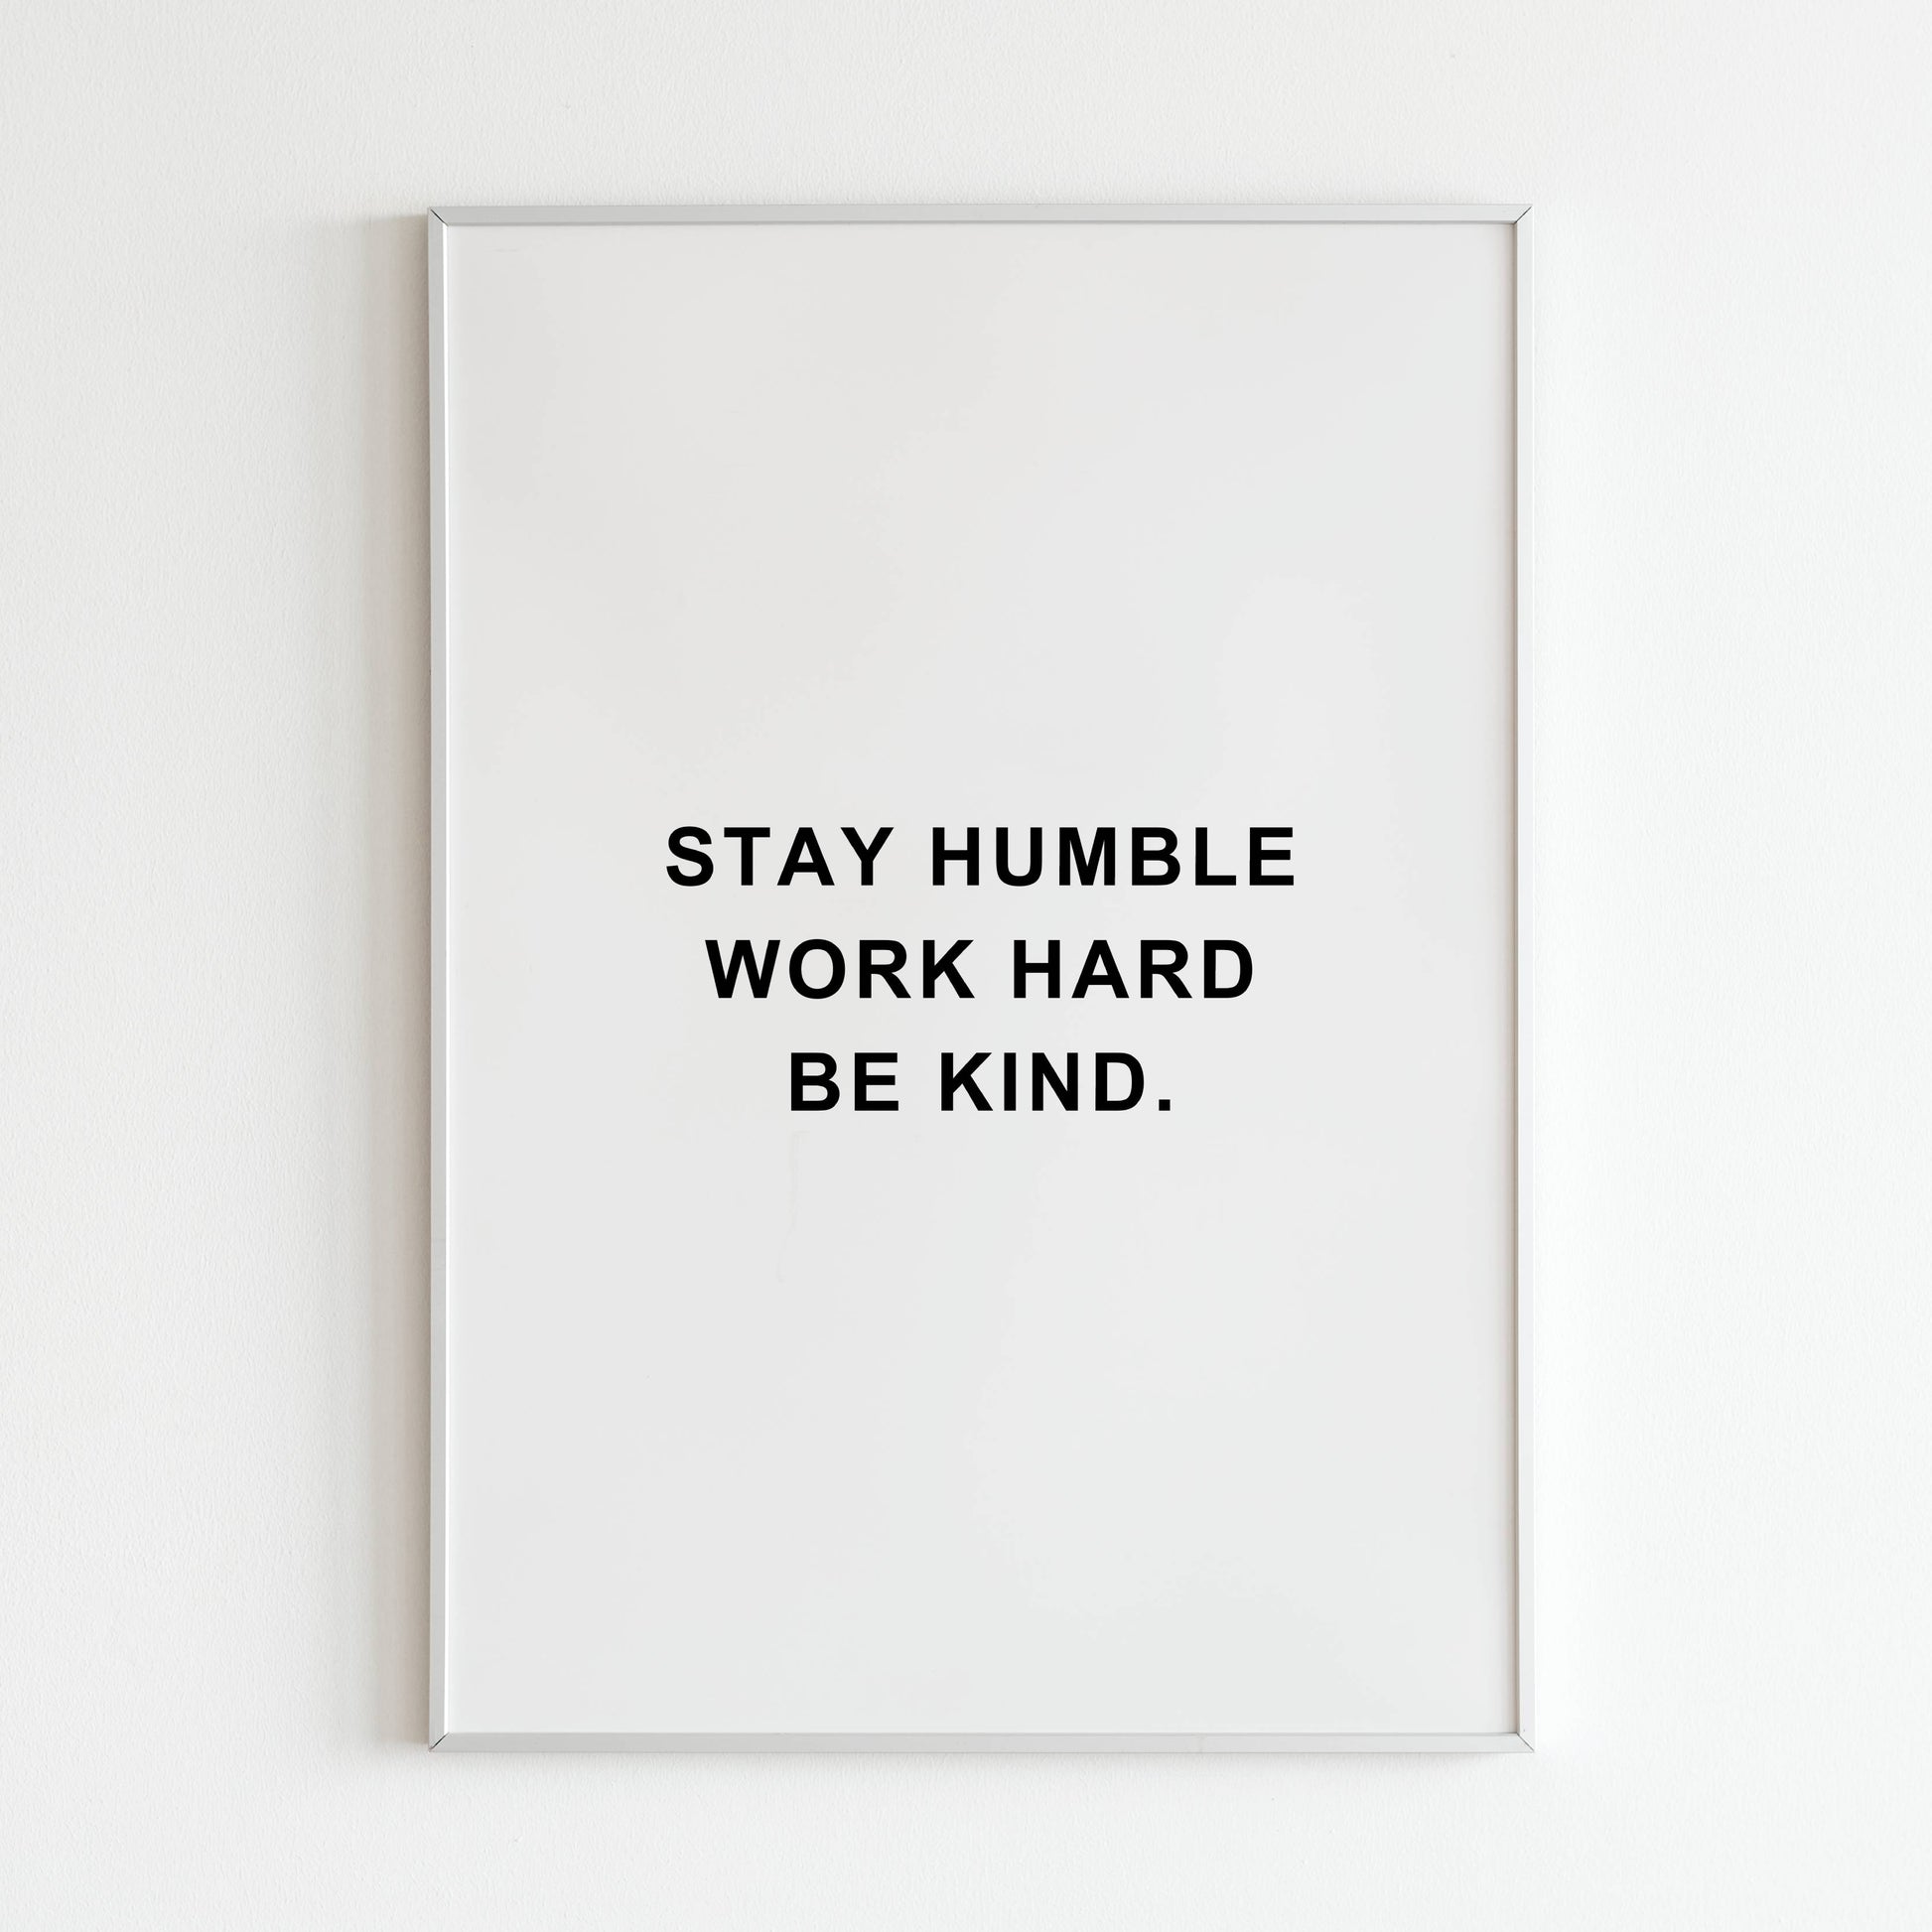 Stay Humble Work Hard Be Kind close-up of printable wall art poster. Focus on the balanced composition and lettering style.